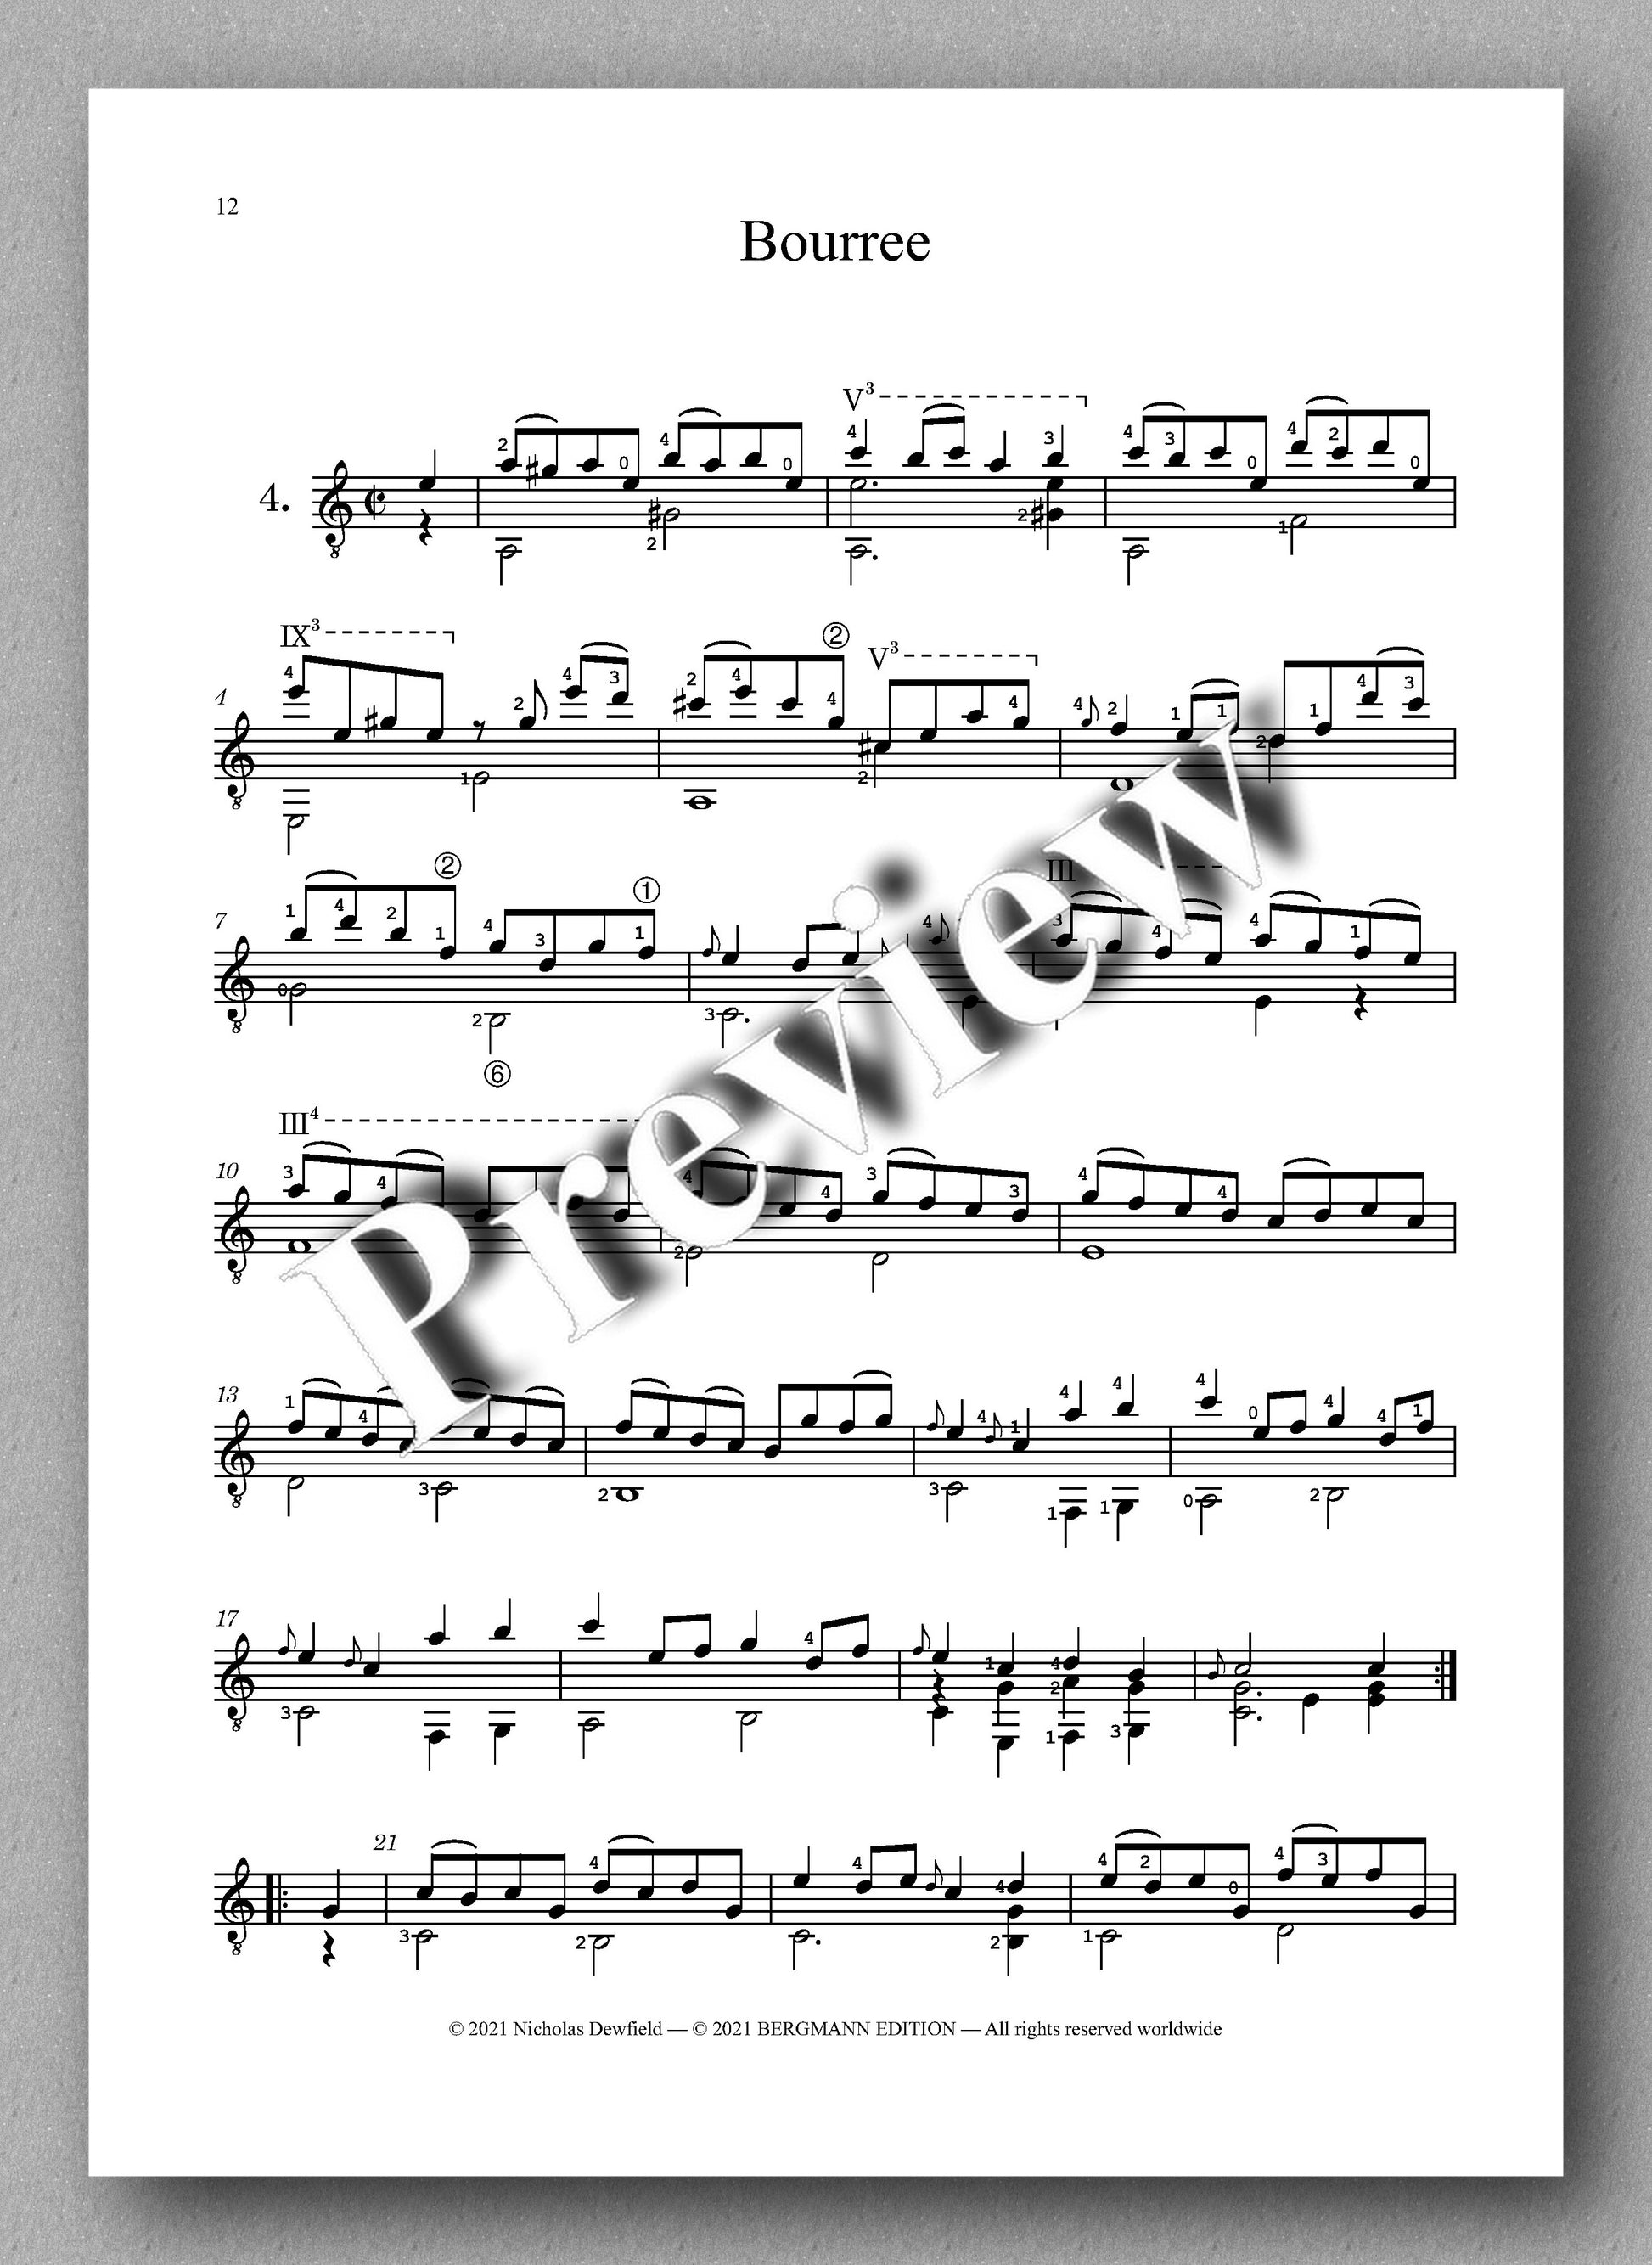 Weiss-Dewfield, Sonata No. 3 - preview of music score 4